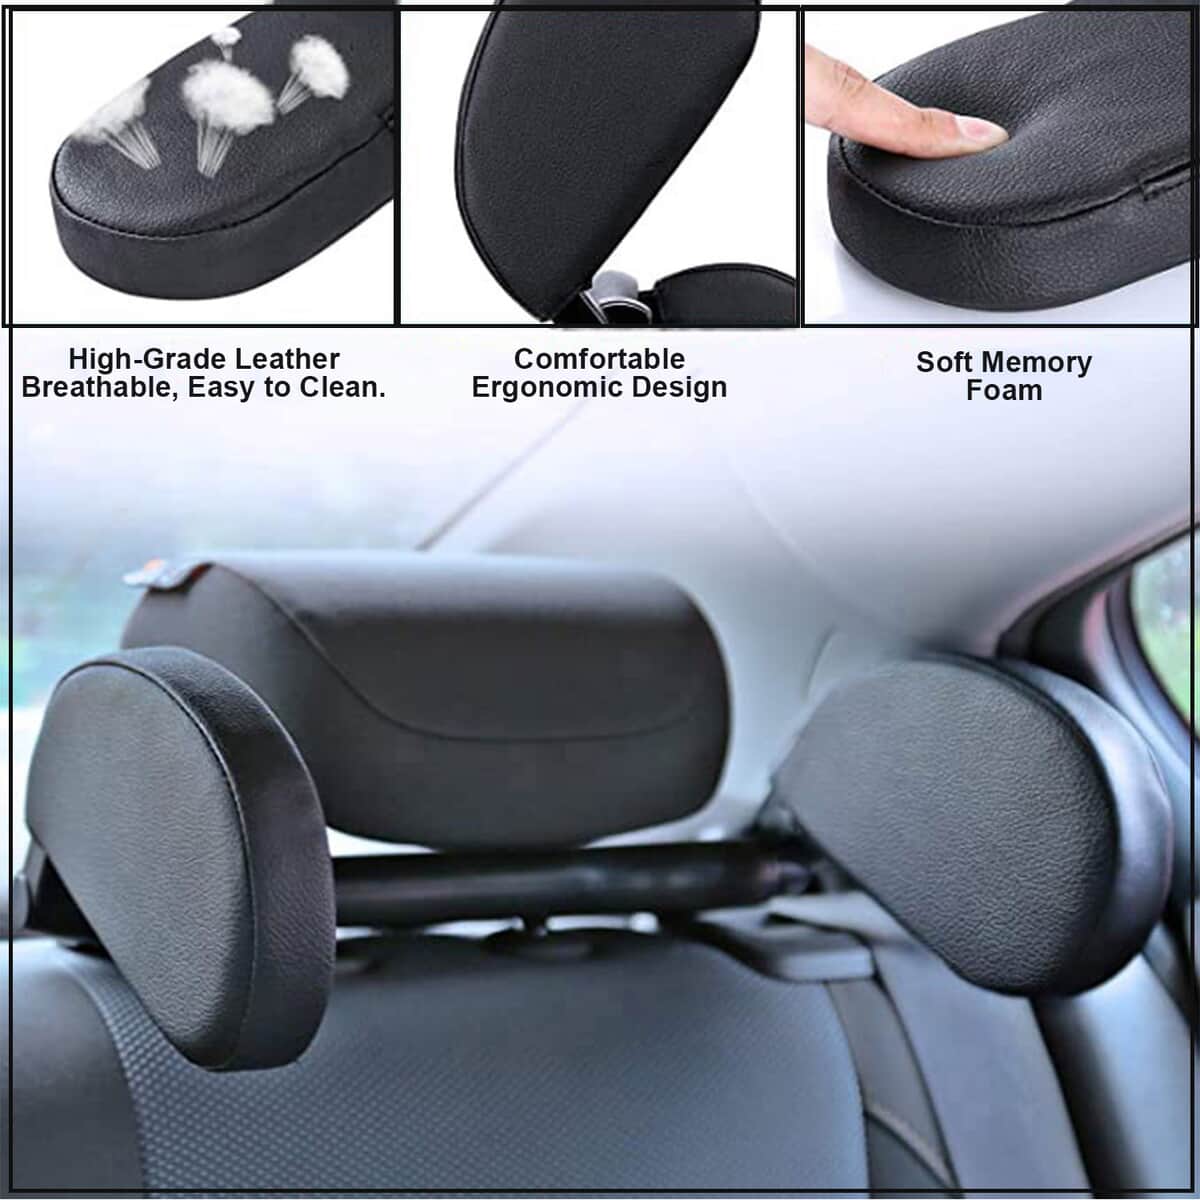 Black Car Sweat-resistant Sleeping Headrest with Side Wings, 180 Degree Adjustable Neck Rest Pillow, Soft Memory Foam, Mountable on Car Seat image number 2